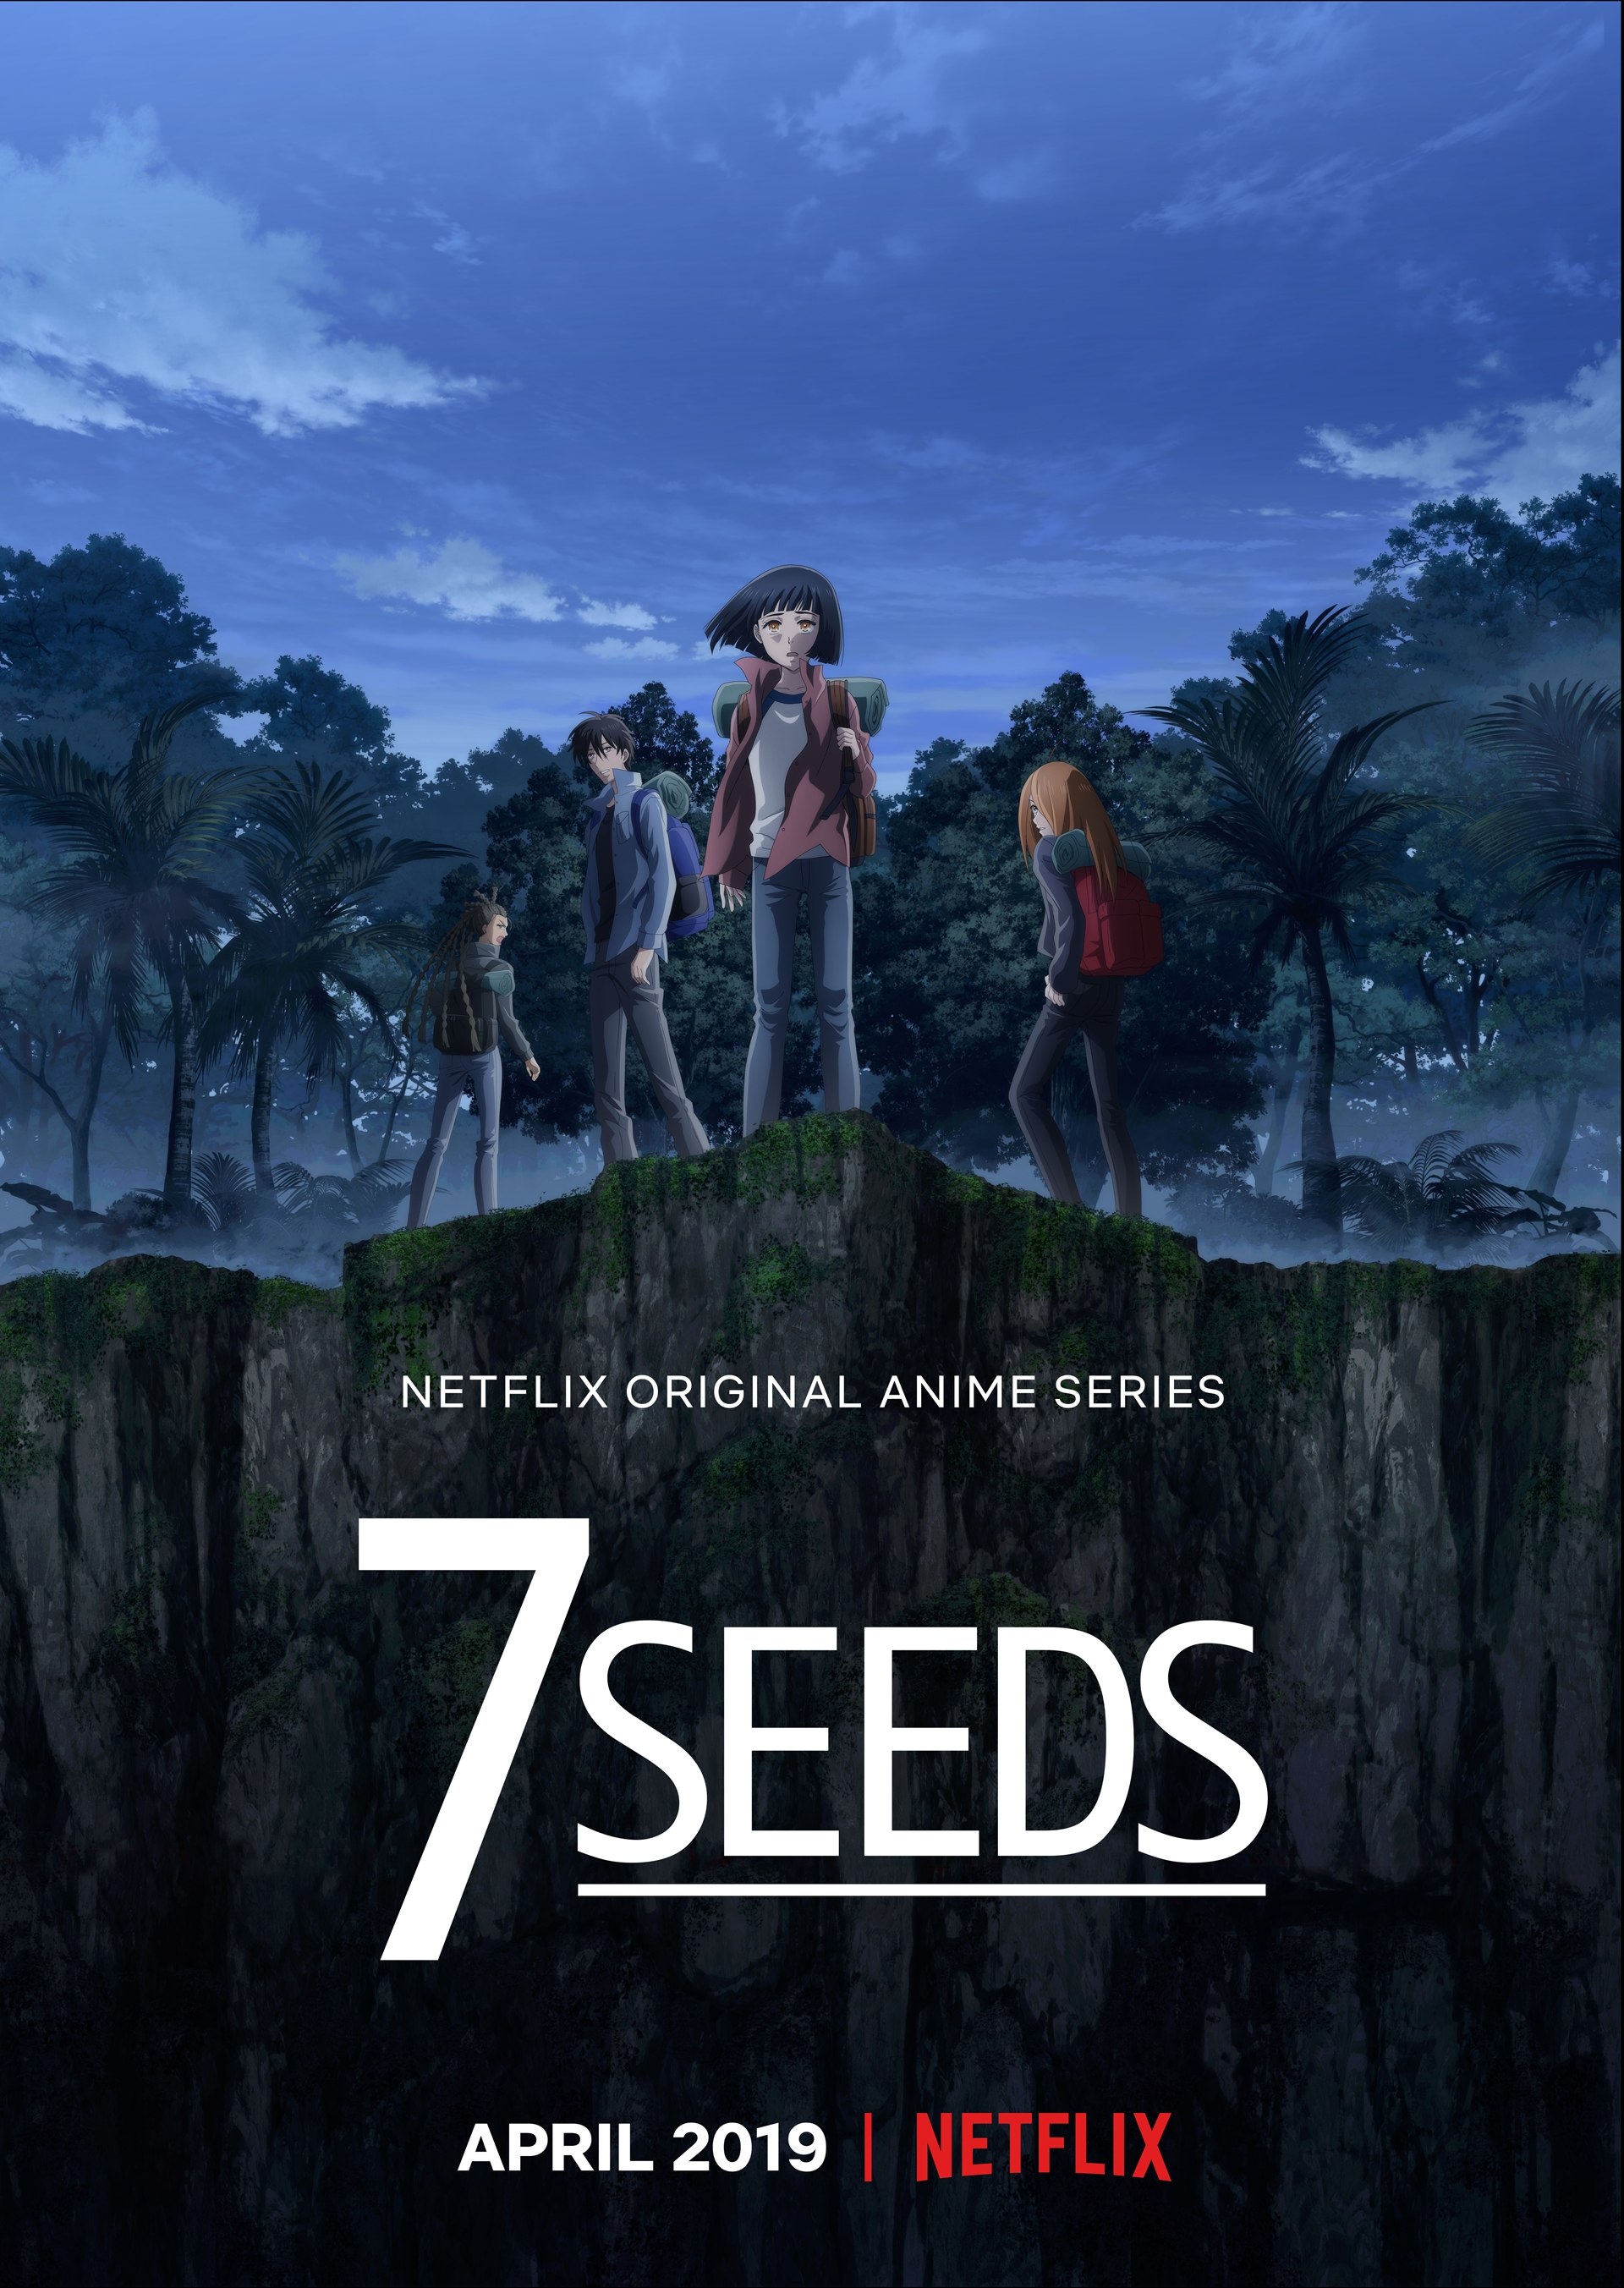 Top 50 Anime TV Shows & Movies on Netflix April 2019 - What's on